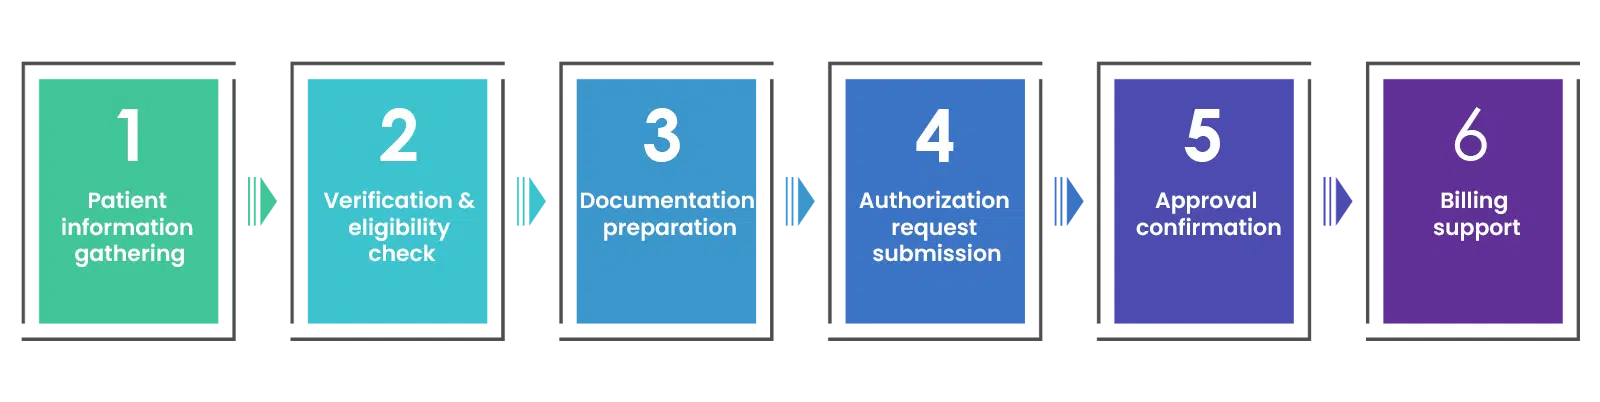 Our Prior Authorization Process Steps